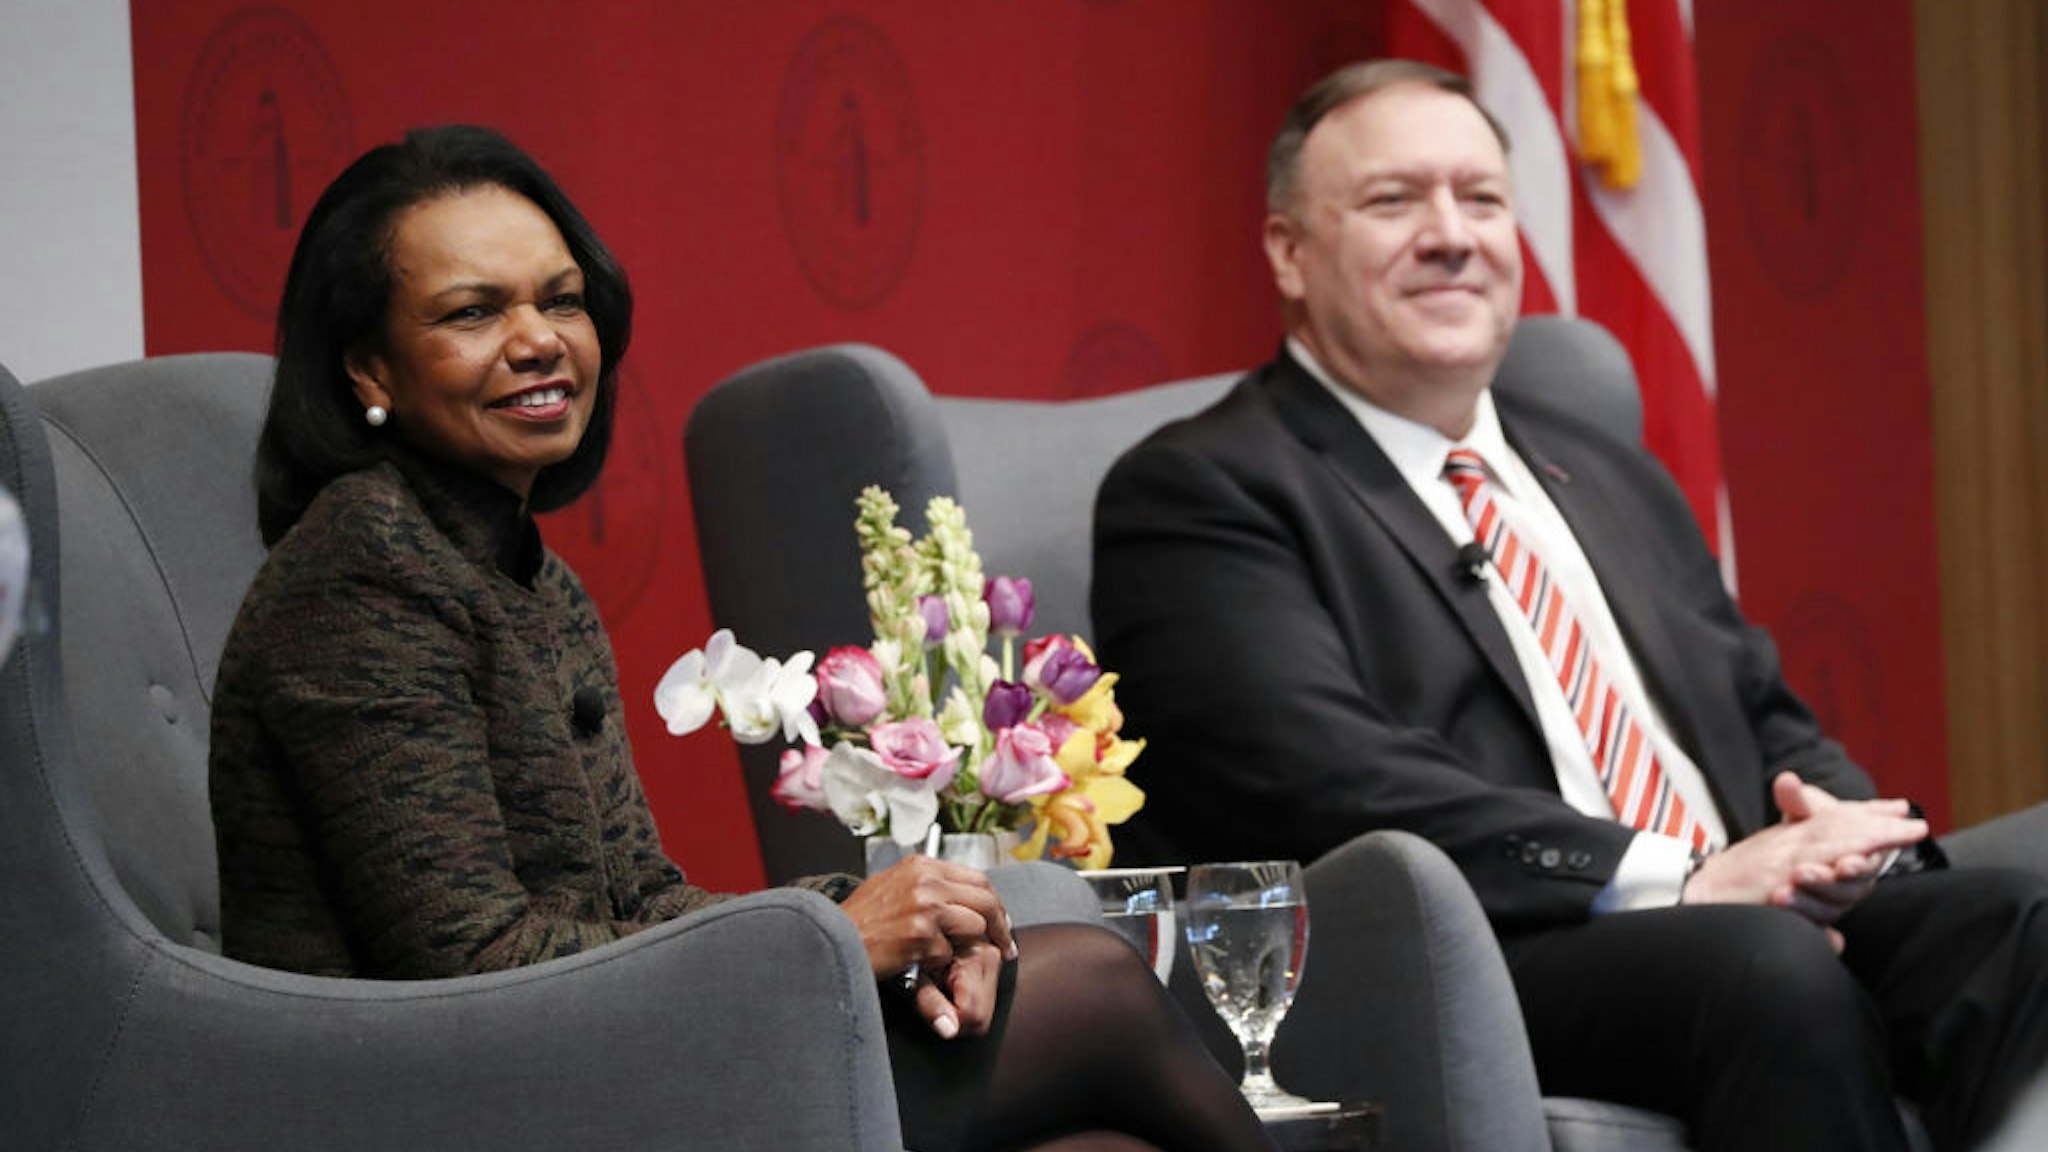 Condoleezza Rice, former U.S. secretary of state, and Mike Pompeo, U.S. secretary of state, right, listen during an event hosted by the Hoover Institution at Stanford University in Stanford, California, U.S., on Monday, Jan. 13, 2020.